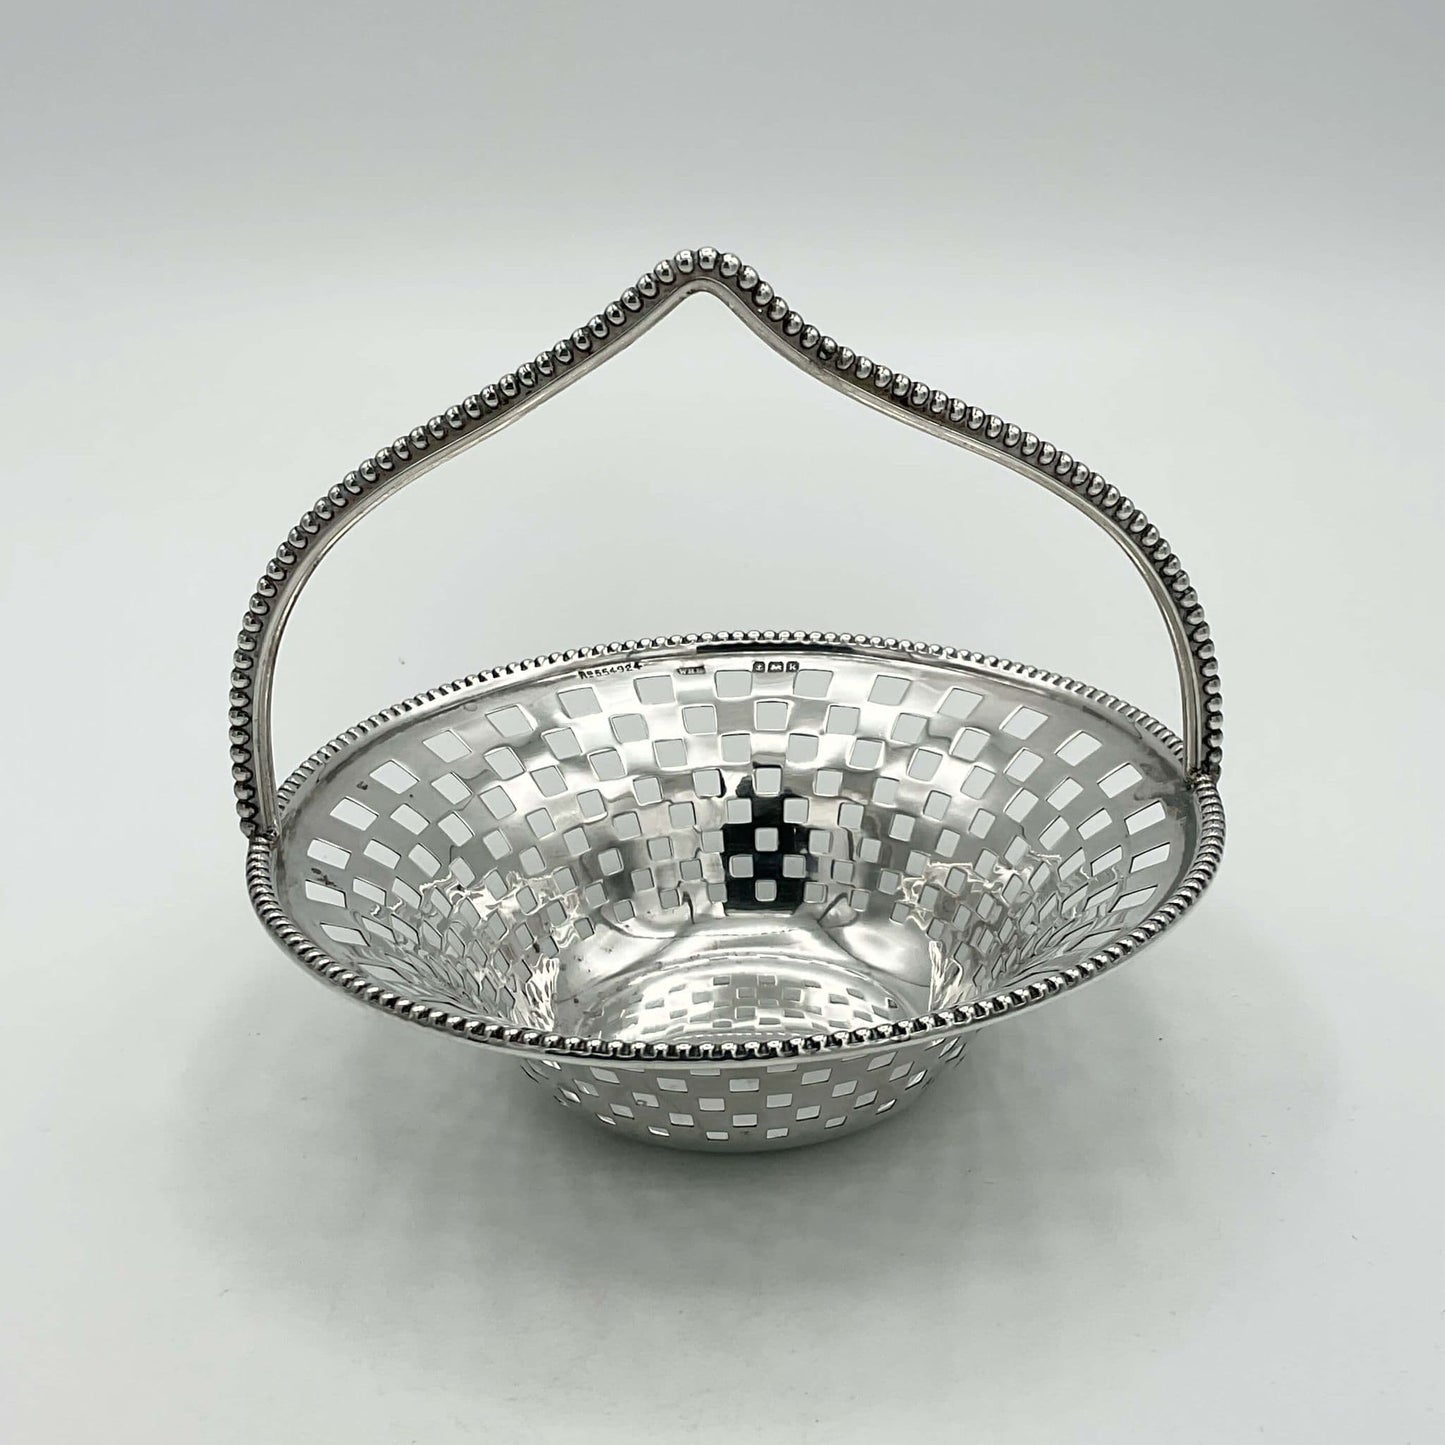 Antique Silver Basket with handle on white background